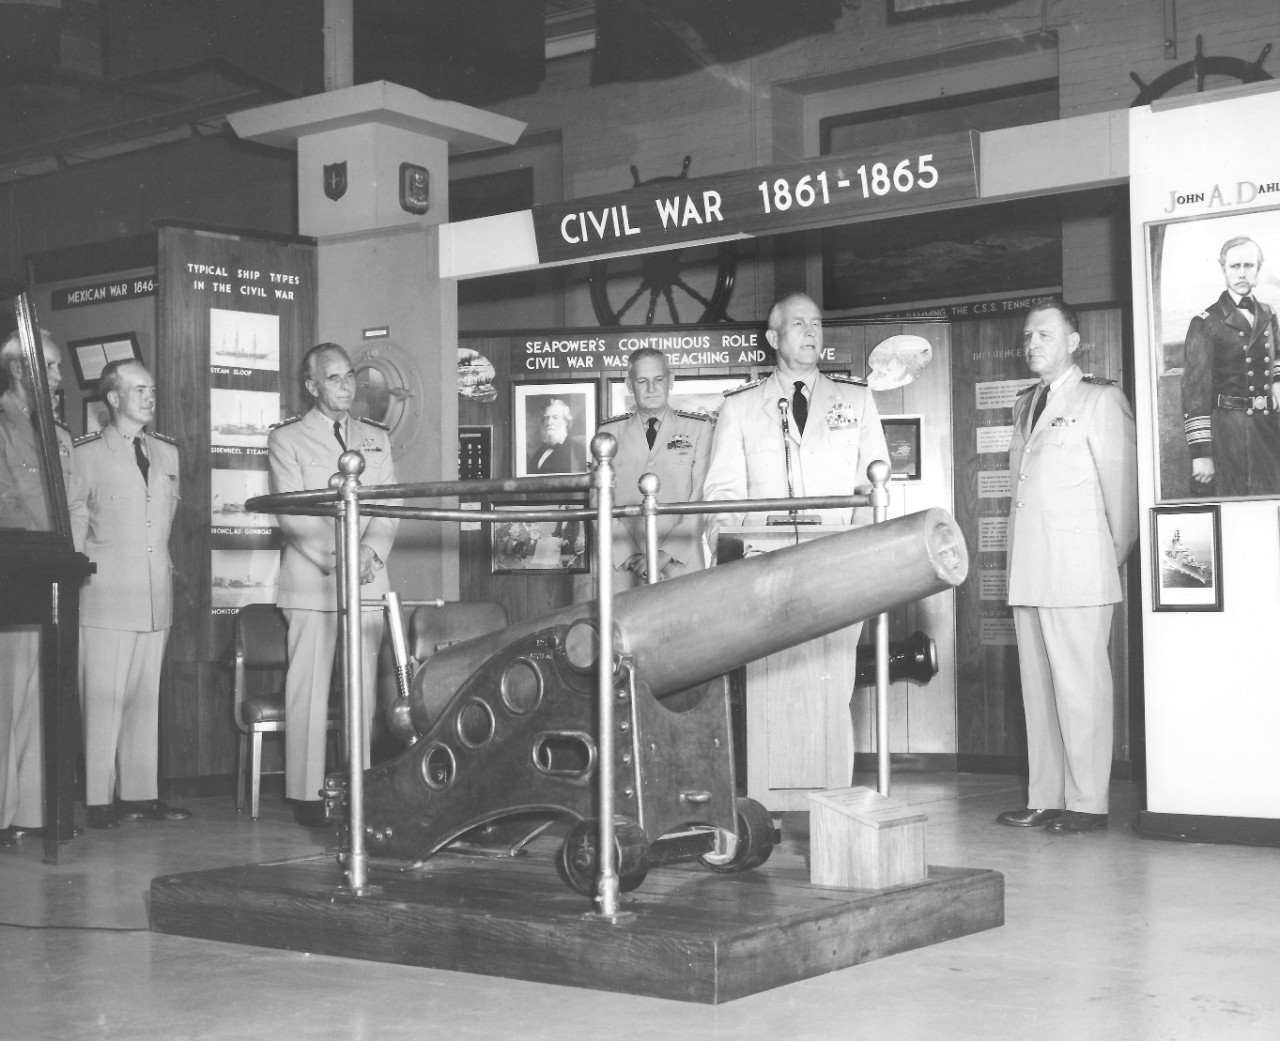 NMUSN-28:    Presentation of 20-Pounder Dahlgren Gun, Navy Memorial Museum, July 1968.    Admiral Willard J. Smith, Commandant, U.S. Coast Guard presents the gun in a formal ceremony.   Others in attendance.   Shown, left to right:   Rear Admiral Ernest M. Eller (blocked by exhibit case); Rear Admiral R.W. Goehring; Admiral Willard J. Smith, Commandant U.S. Coast Guard; Rear Admiral Elliott Loughlin; Admiral Thomas H. Moorer, Chief of Naval Operations (speaking); and Captain Roy C. Smith, Director, Navy Memorial Museum.    This artifact is now on display by the frigate, USS Constitution, Fighting Top Area.    National Museum of the U.S. Navy Photograph Collection.   